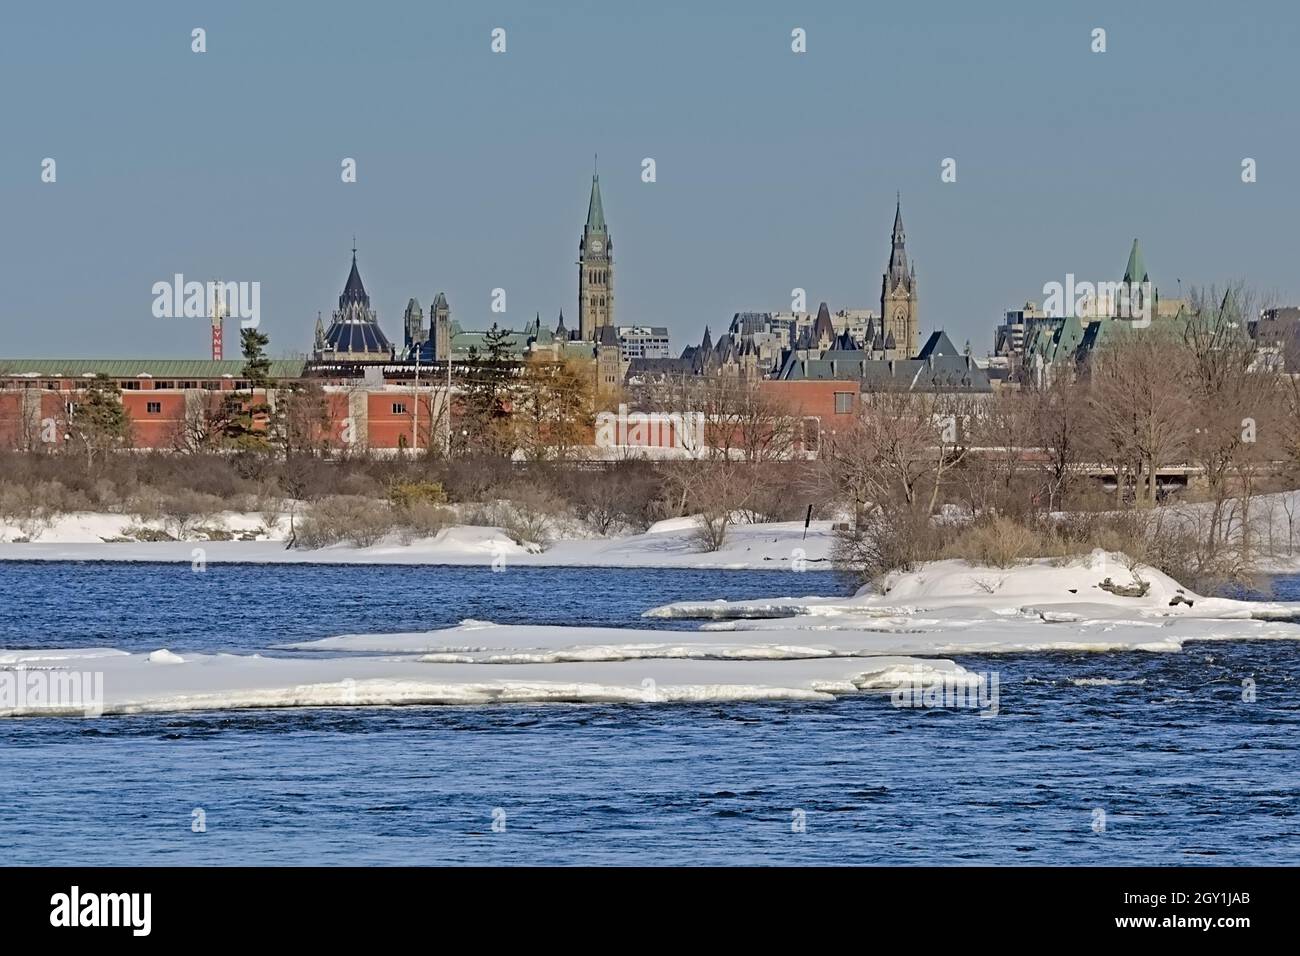 Neo gothic government buildings of Parliament hill, Ottawa, view from across the river with ice on a sunny winter day Stock Photo